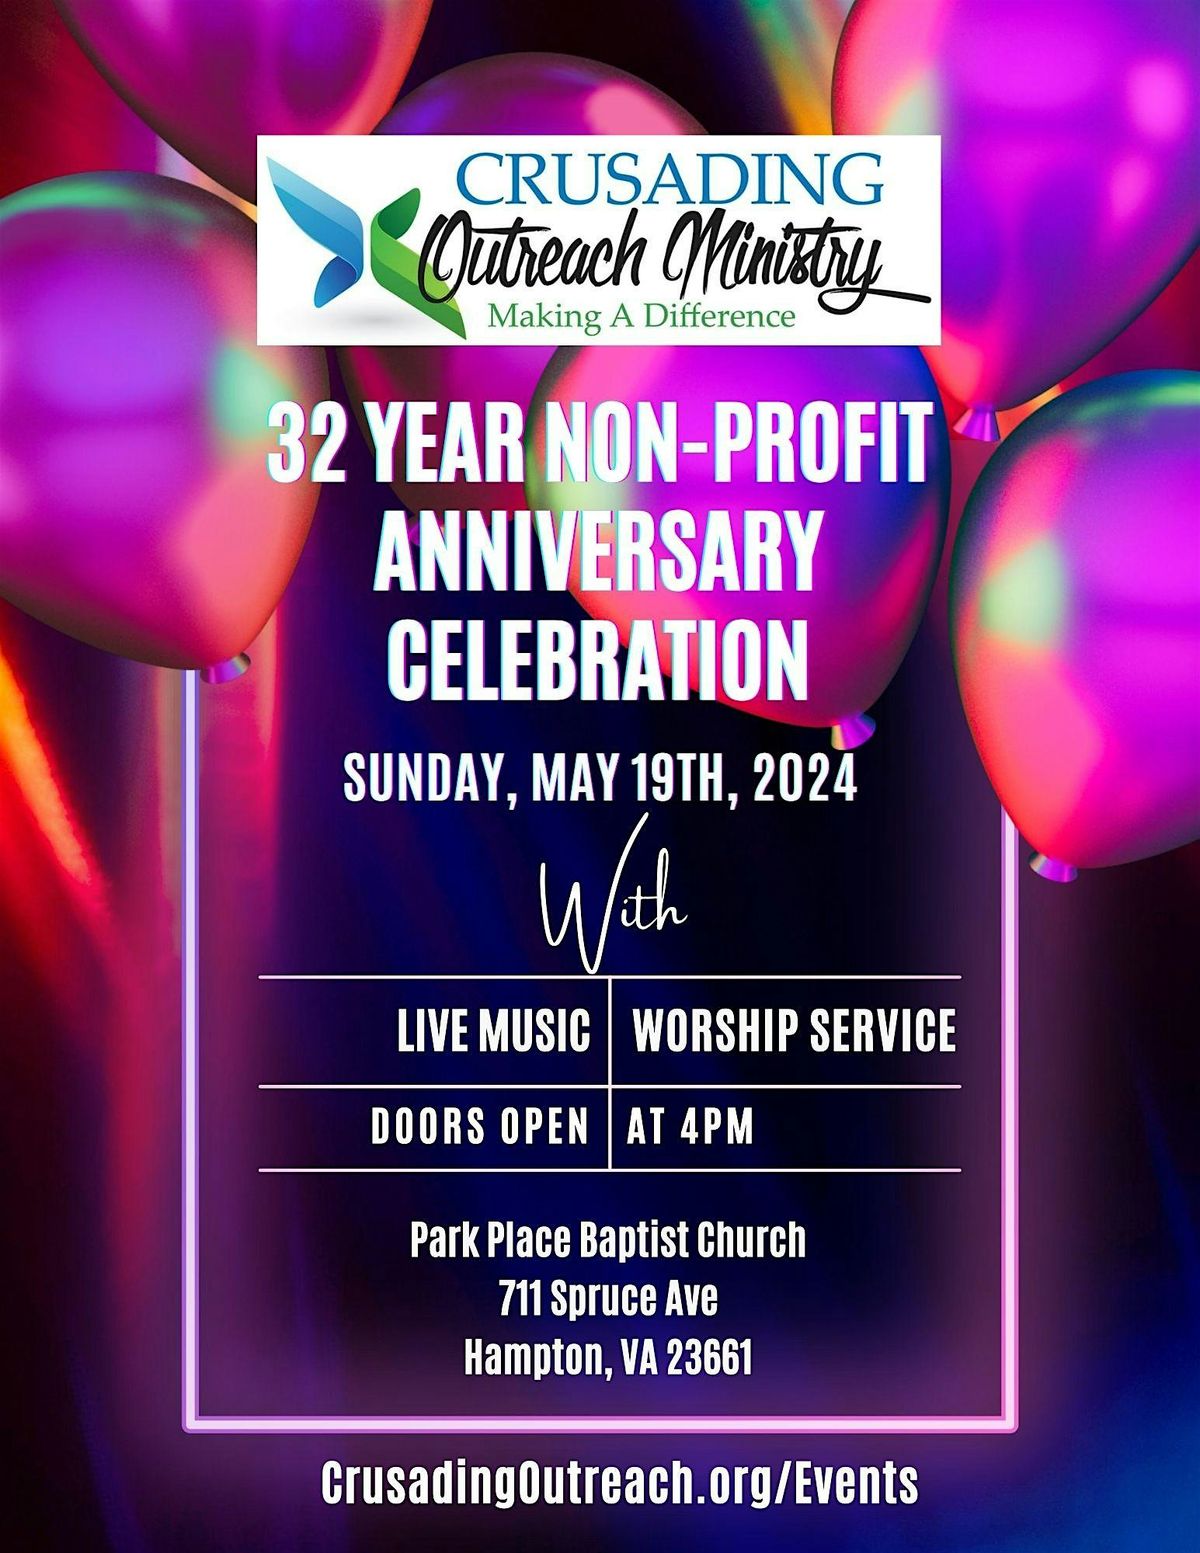 Crusading Outreach Ministry, Inc.'s 32nd Non Profit Anniversary